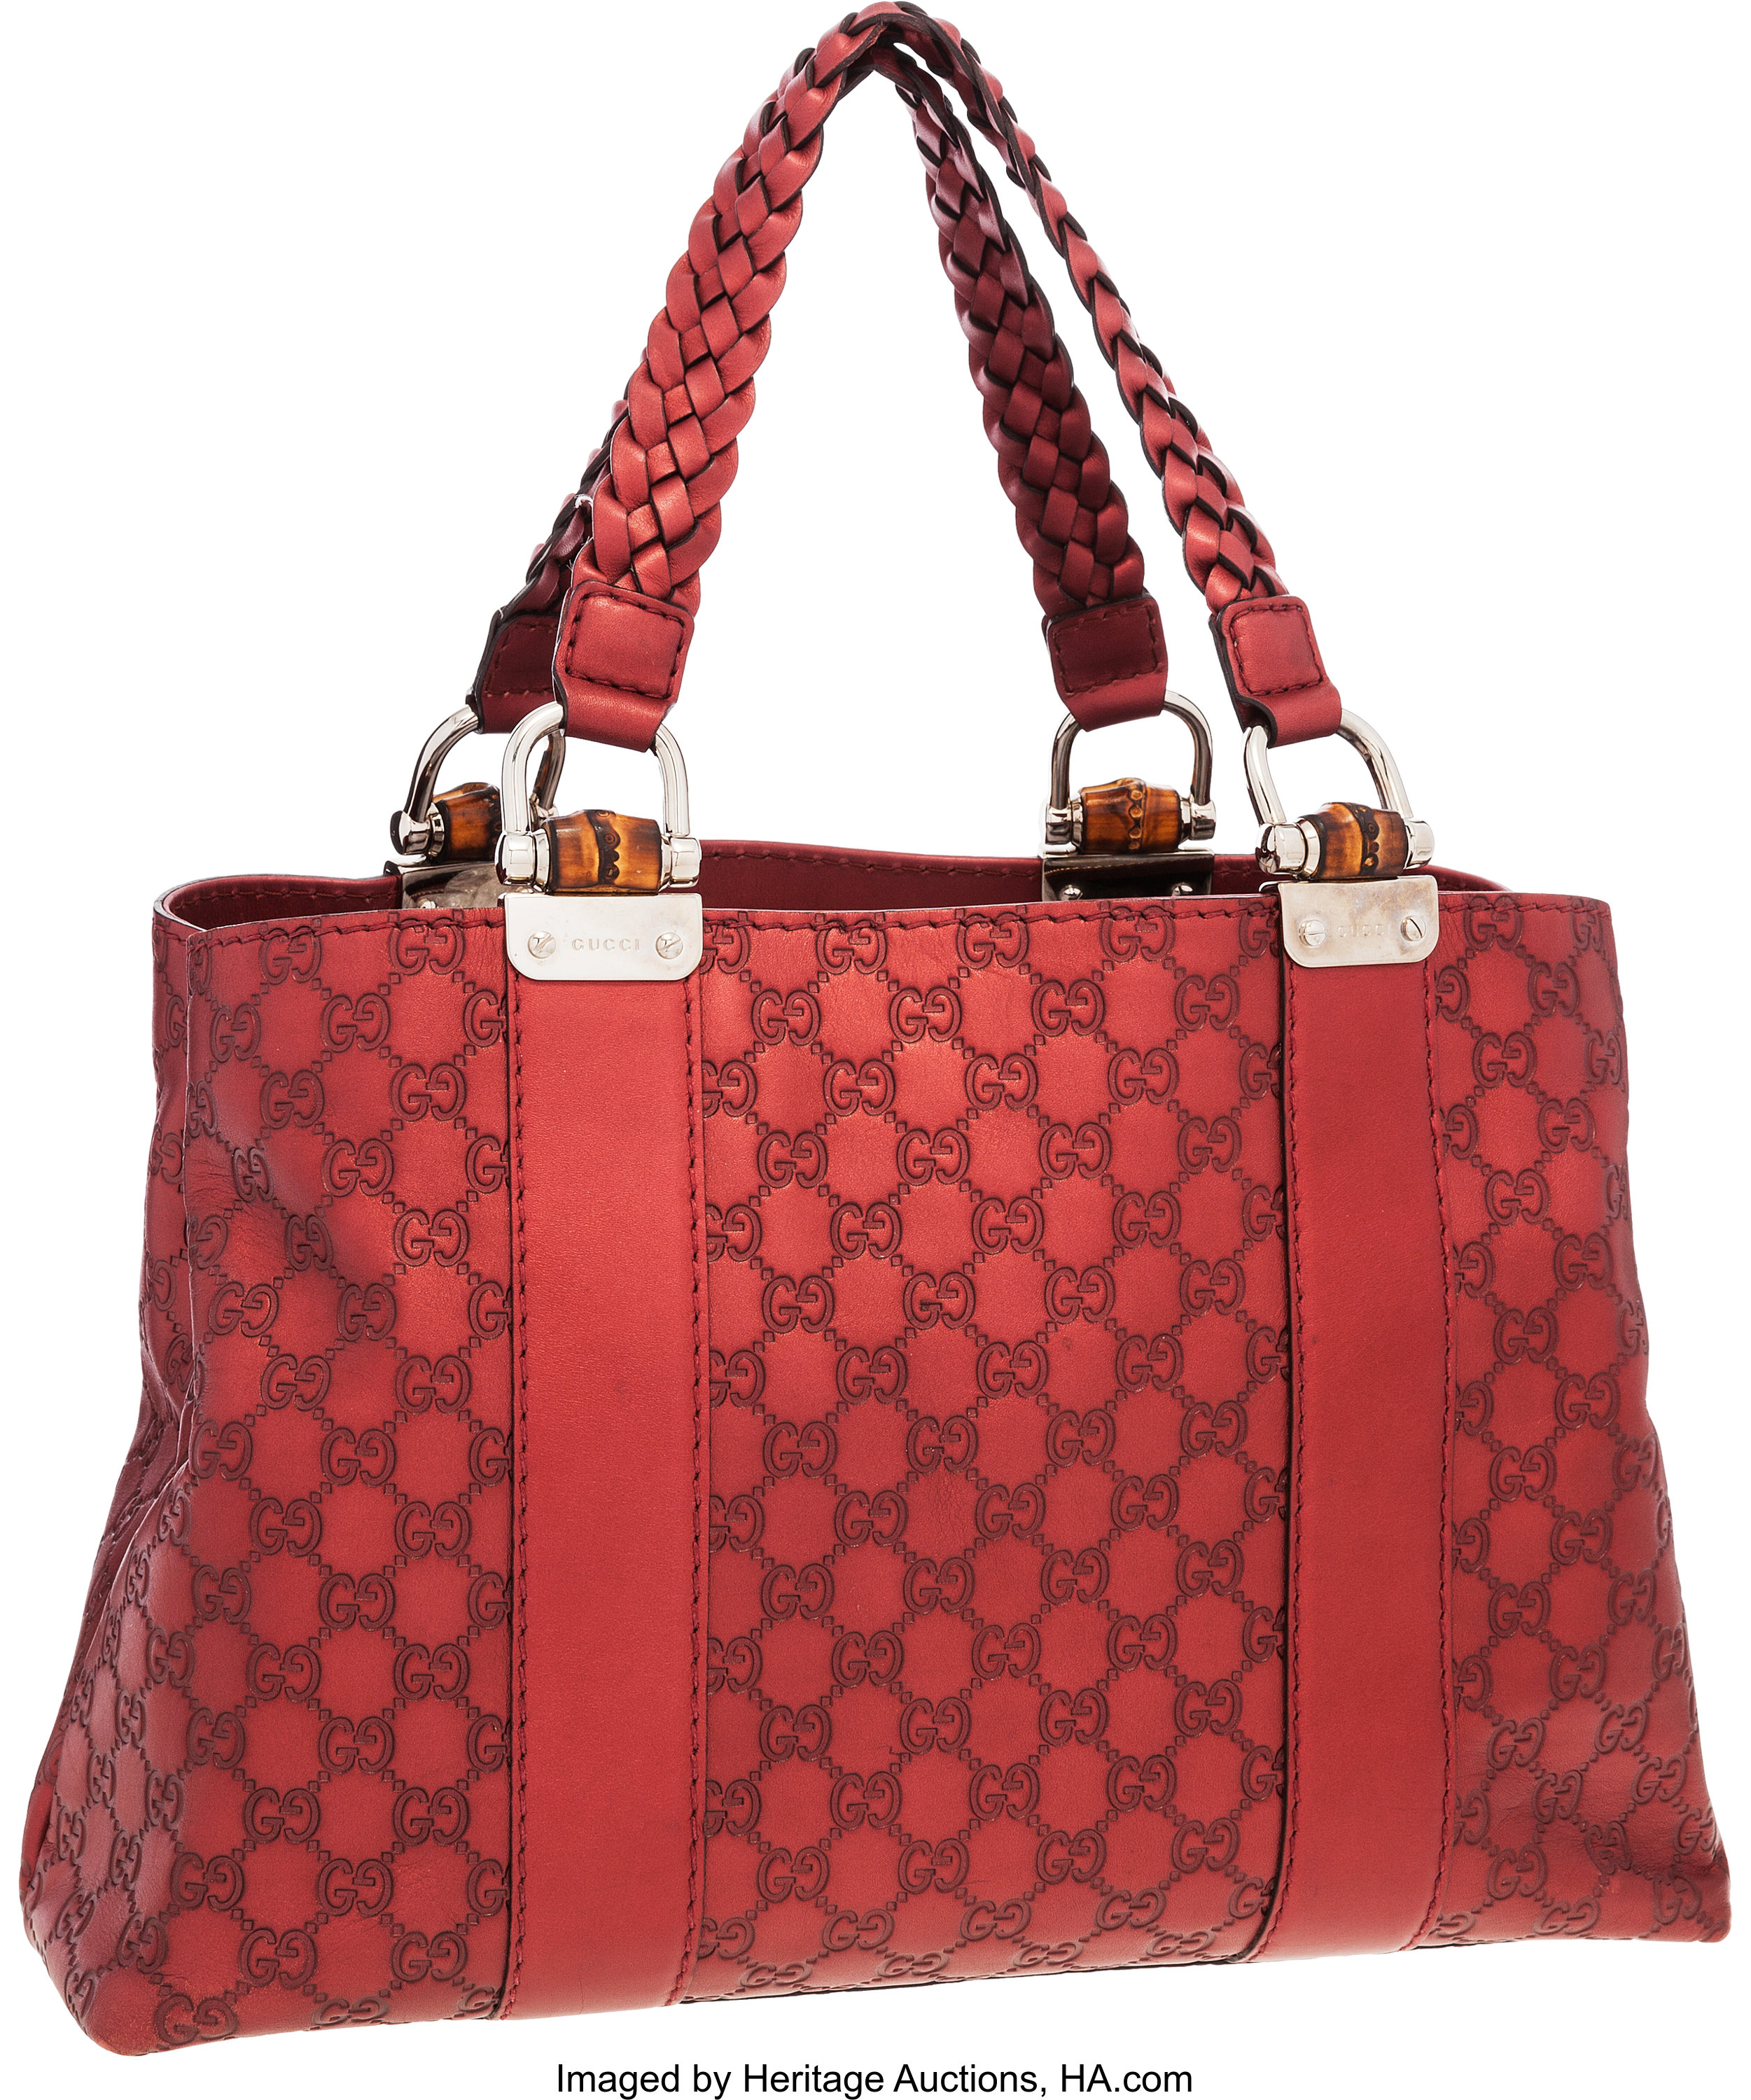 Gucci Red Monogram Leather Tote Bag with Silver Hardware . Very | Lot  #58859 | Heritage Auctions